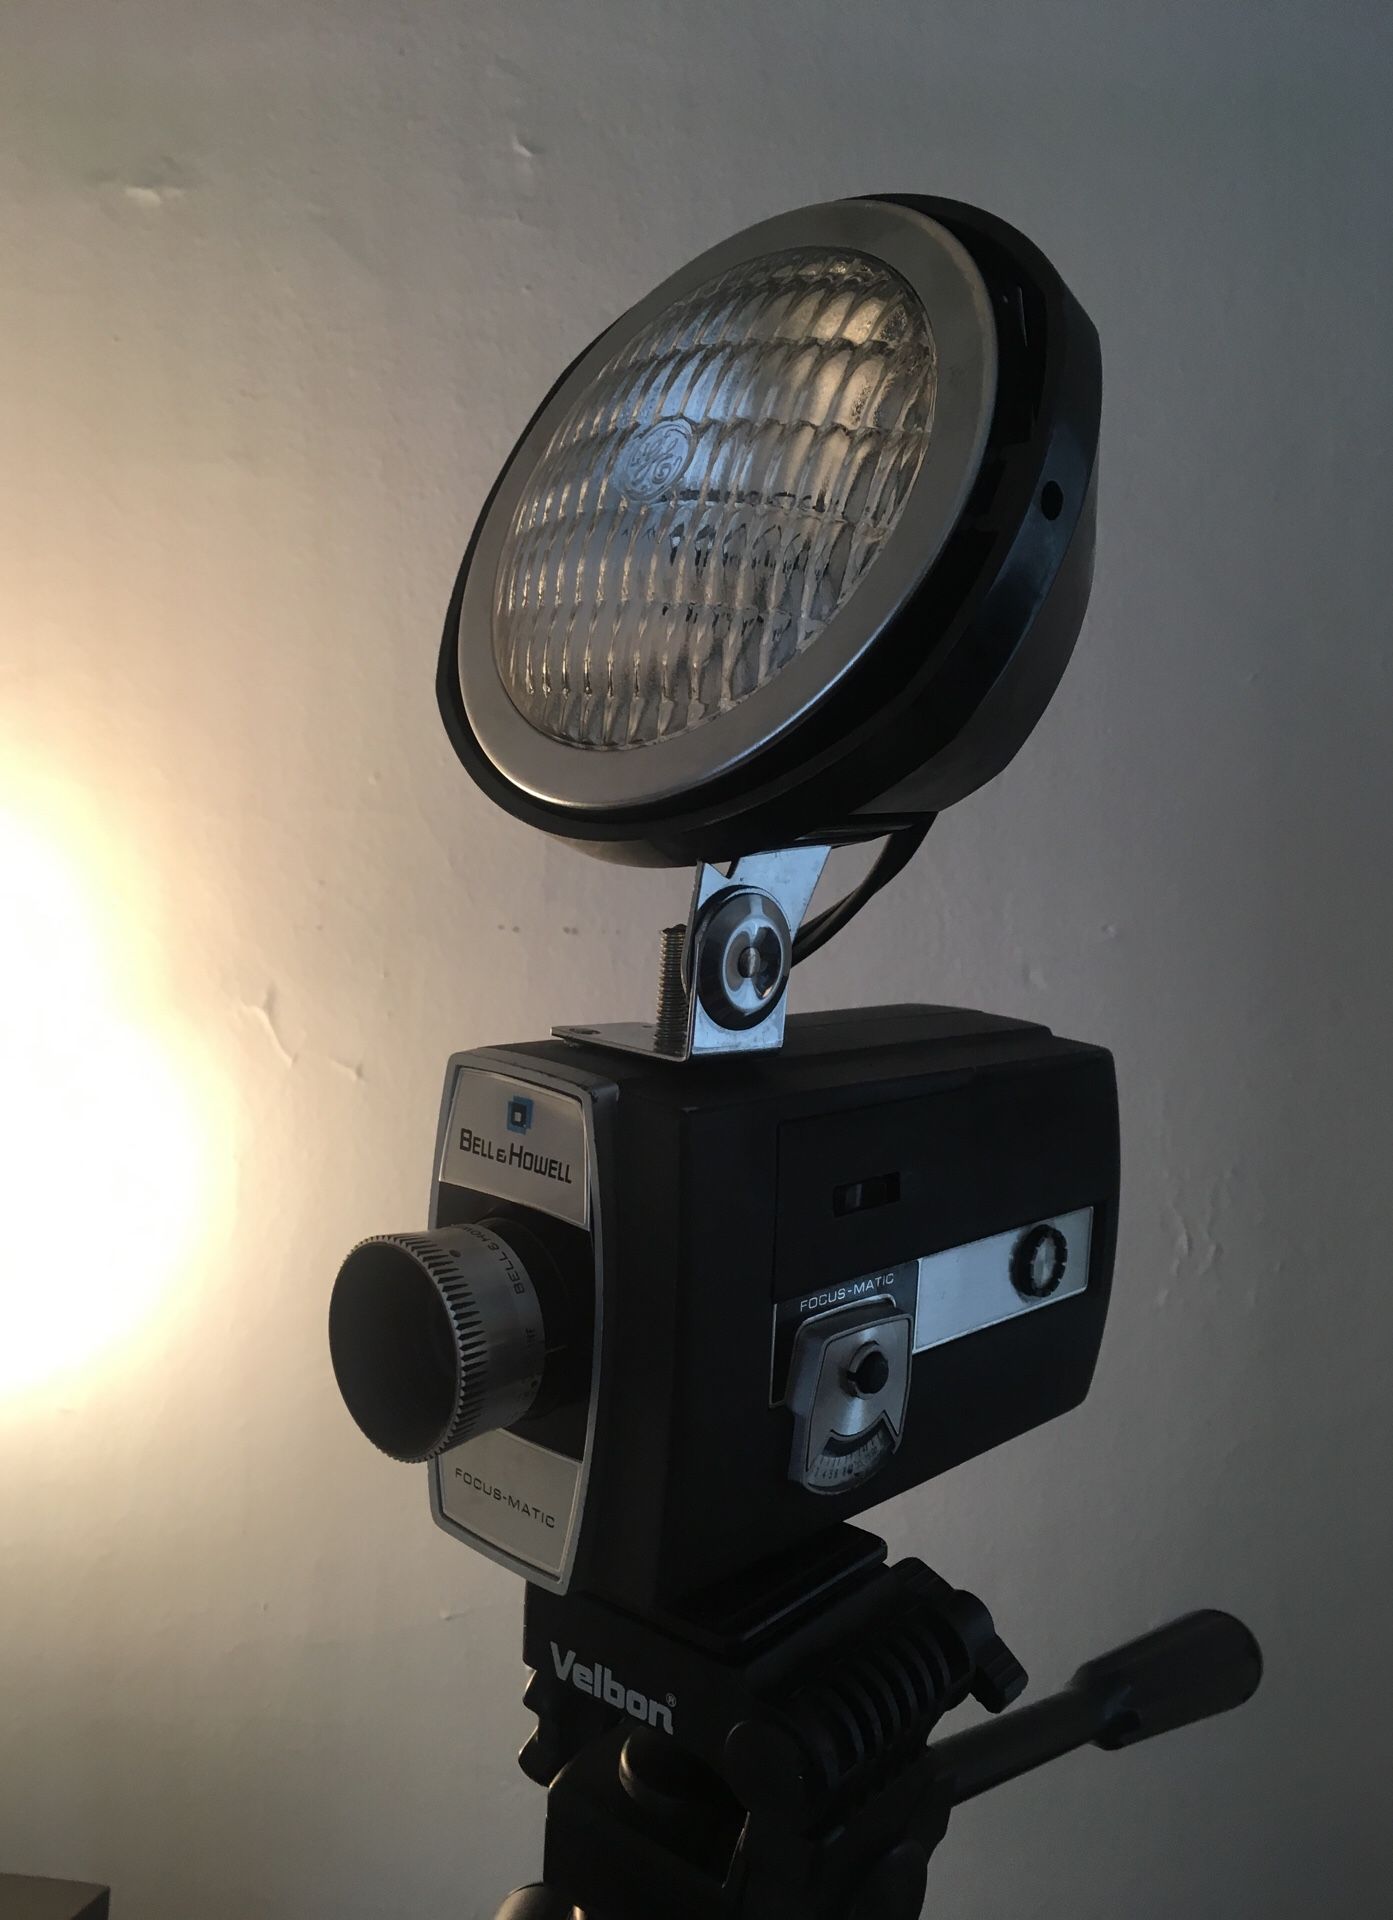 Bell and Howell model 435 vintage video camera